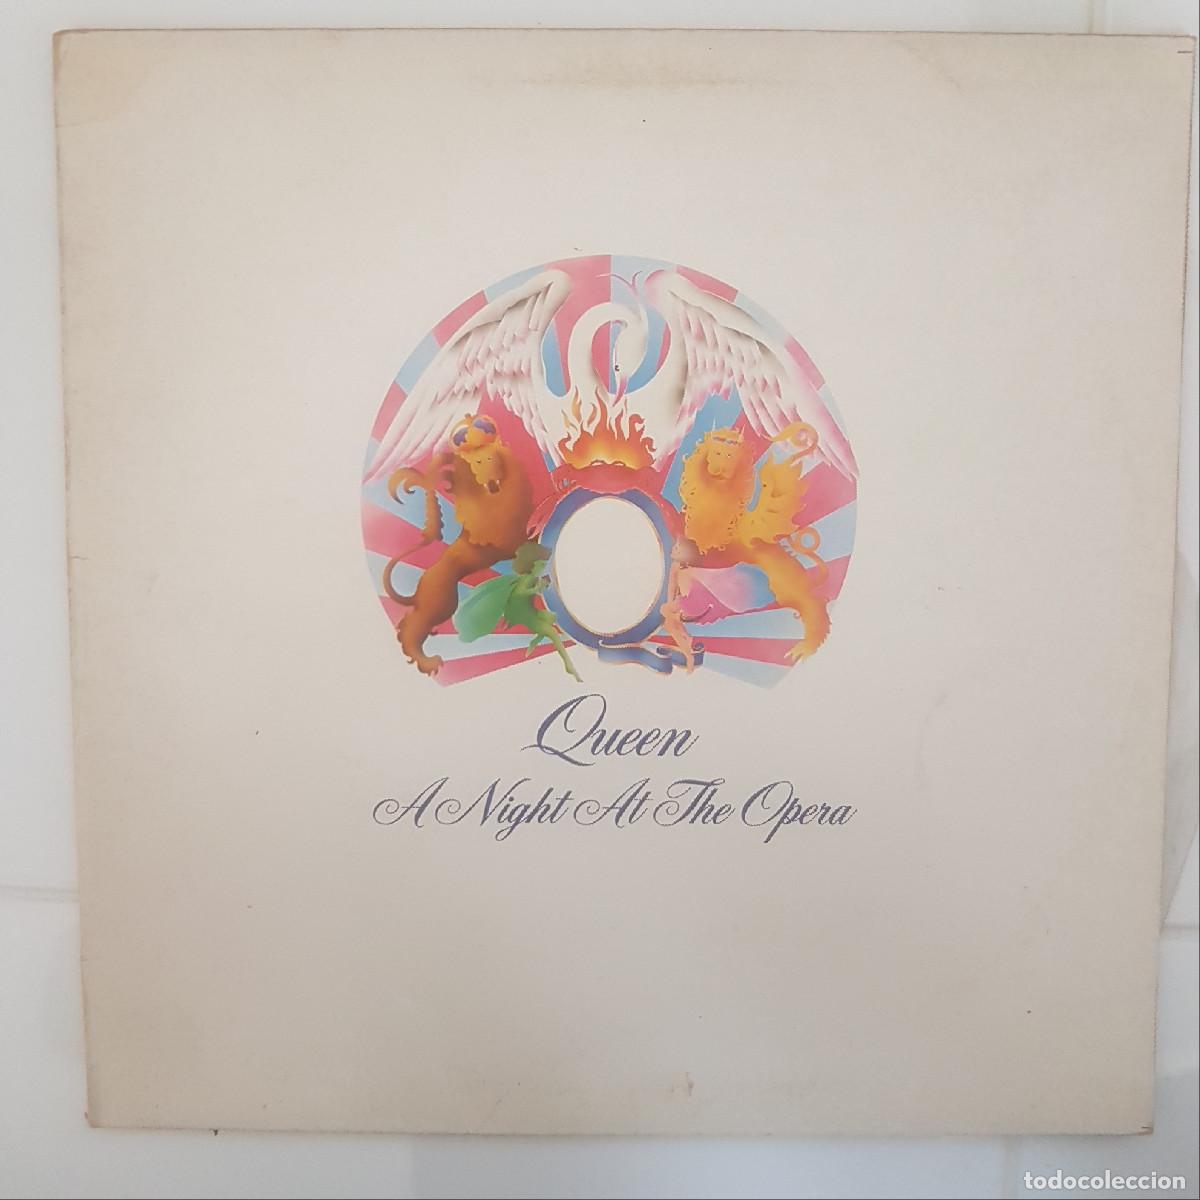 VINILOS, QUEEN - A NIGHT AT THE OPERA